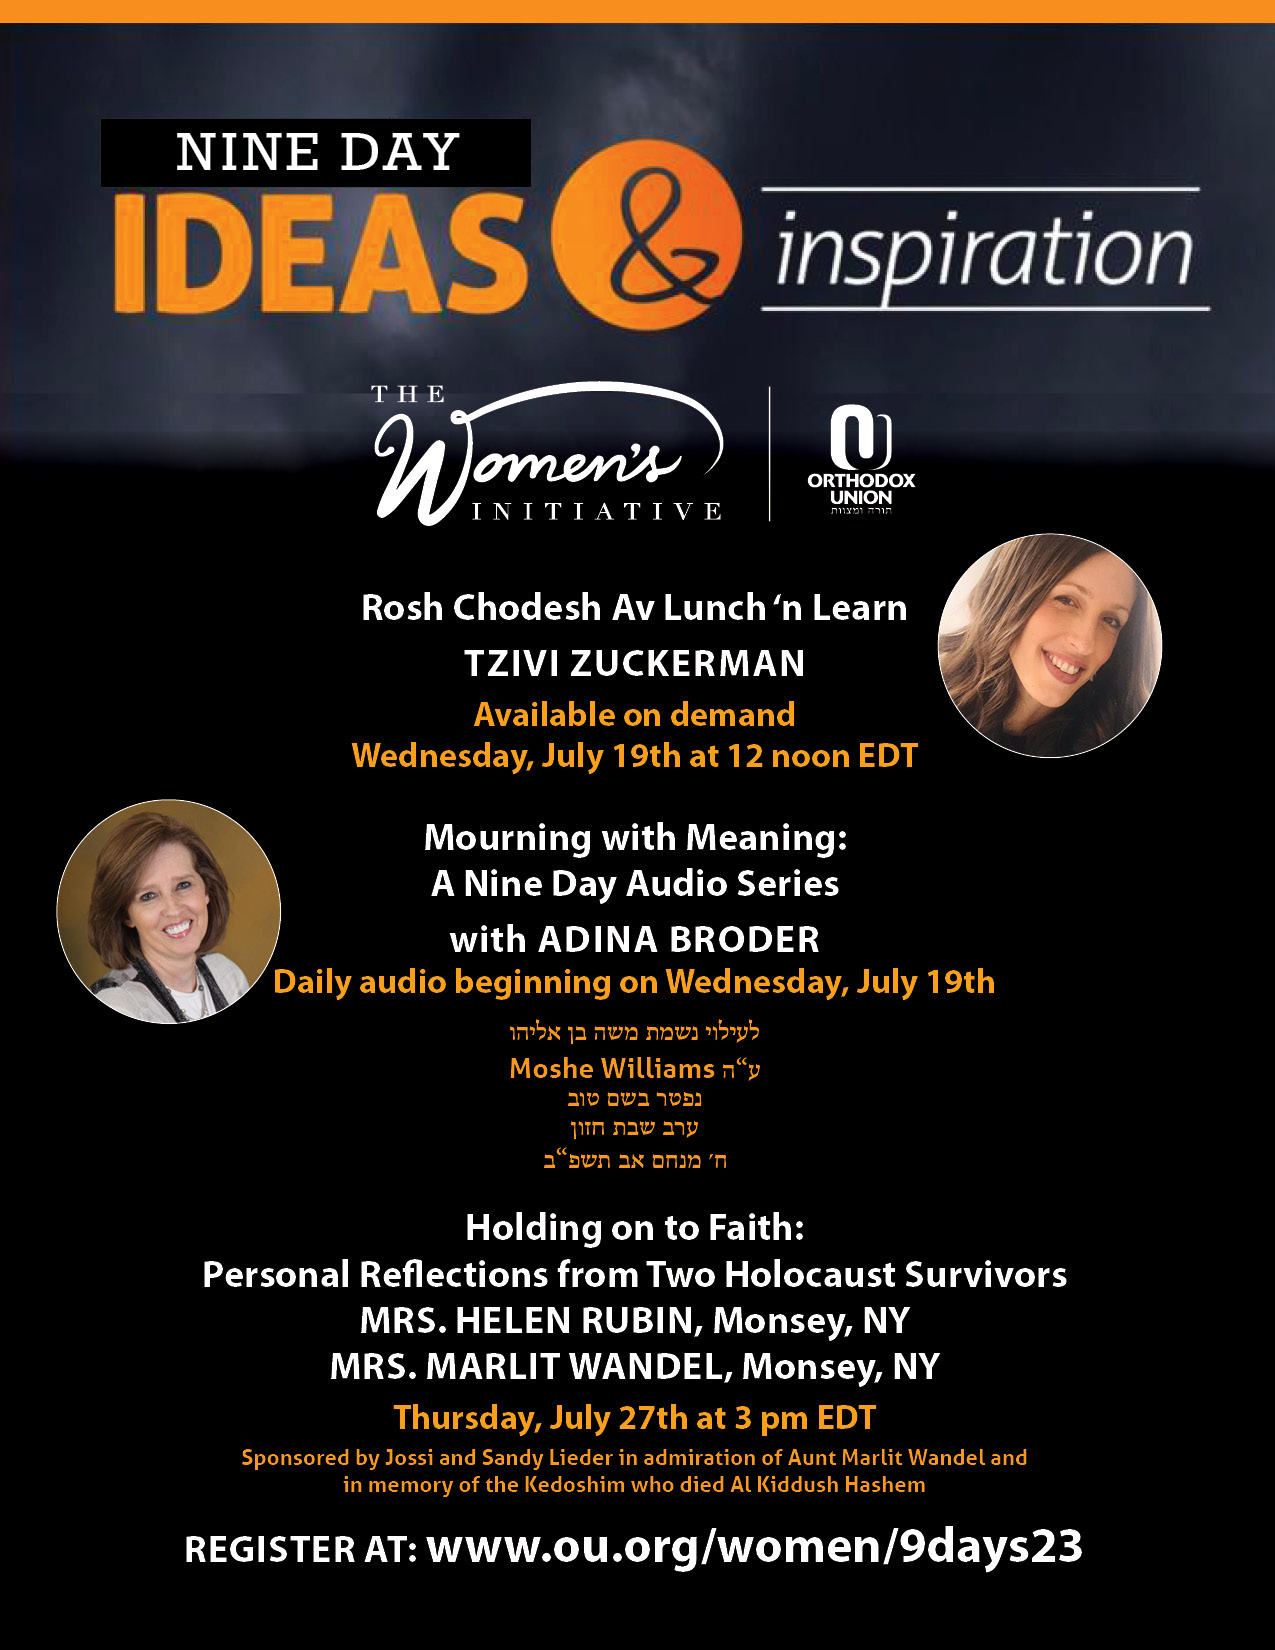 Register for 9 Days Ideas and Inspiration